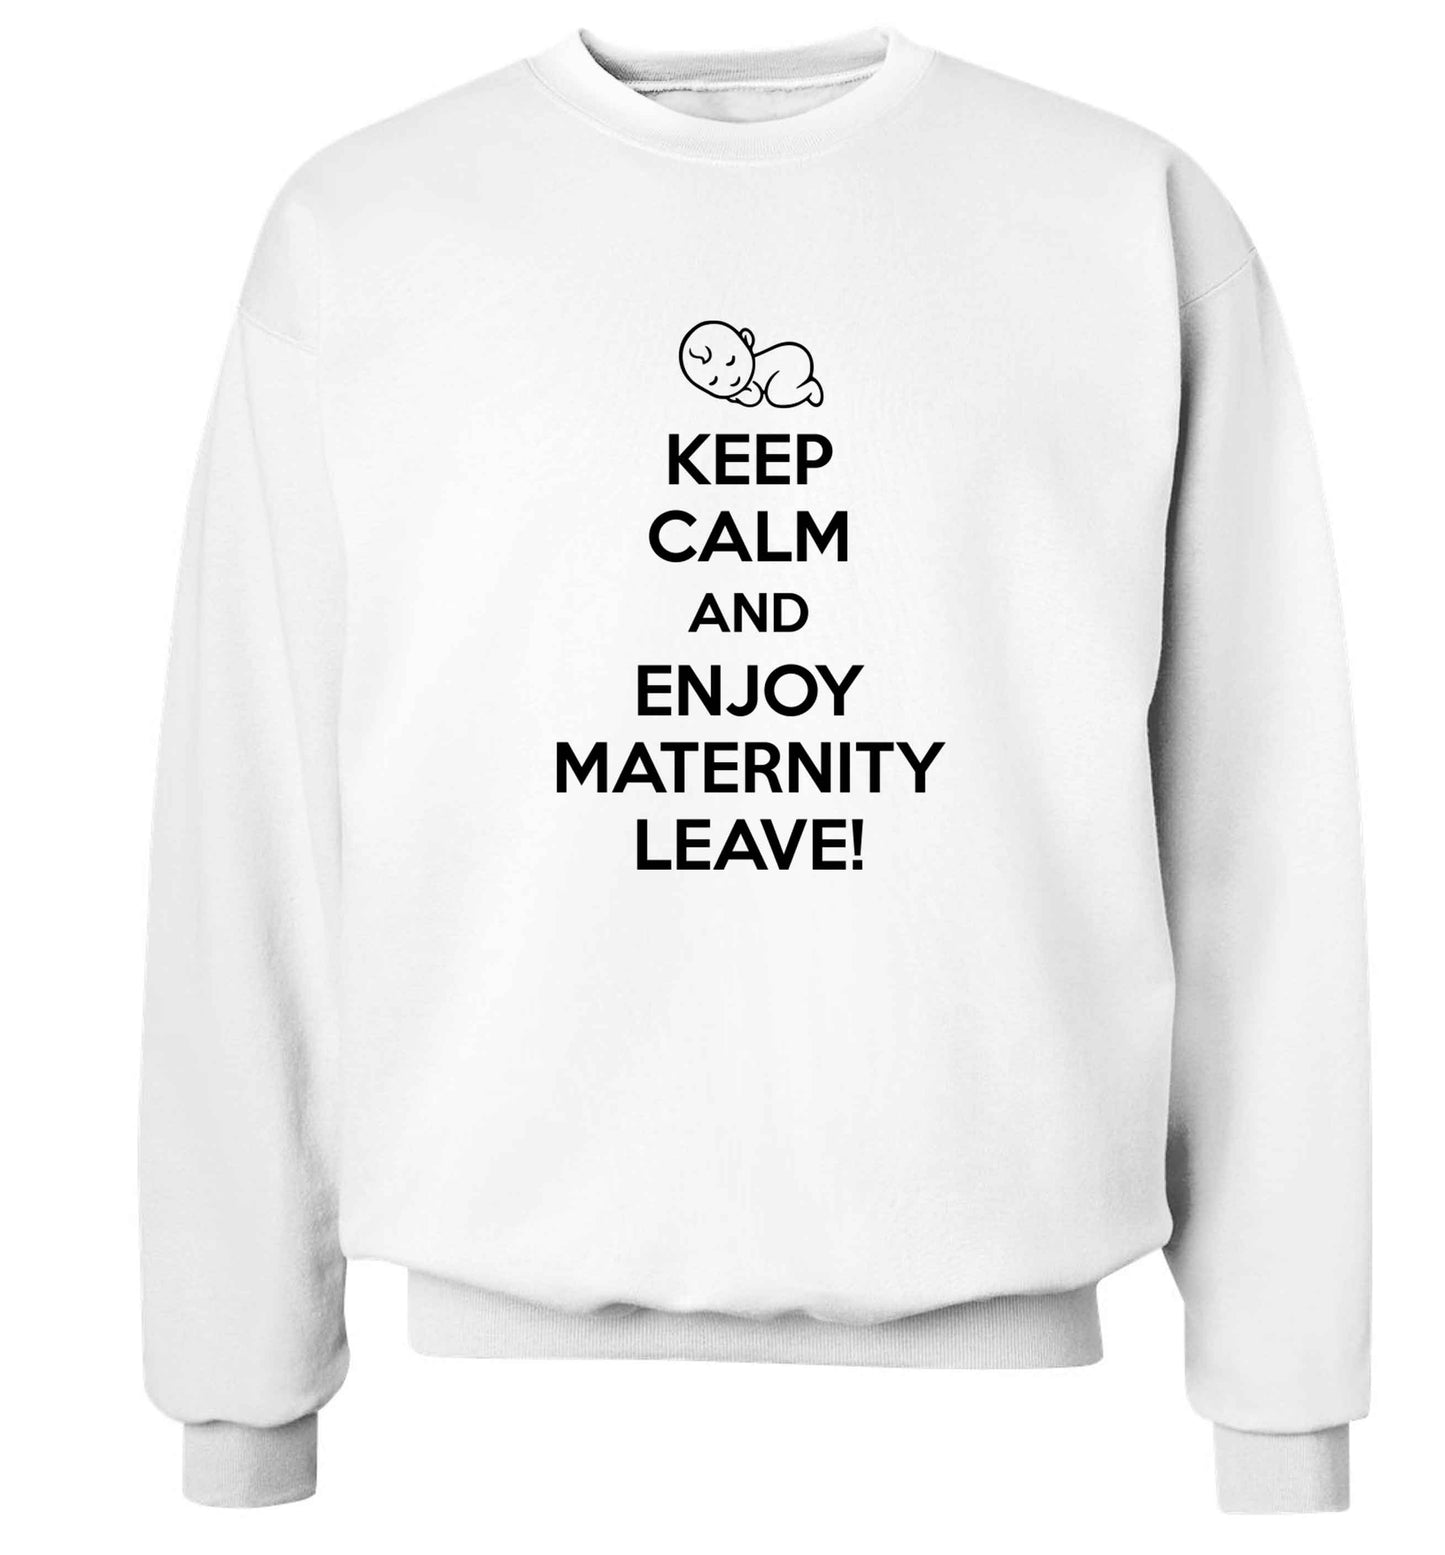 Keep calm and enjoy maternity leave Adult's unisex white Sweater 2XL